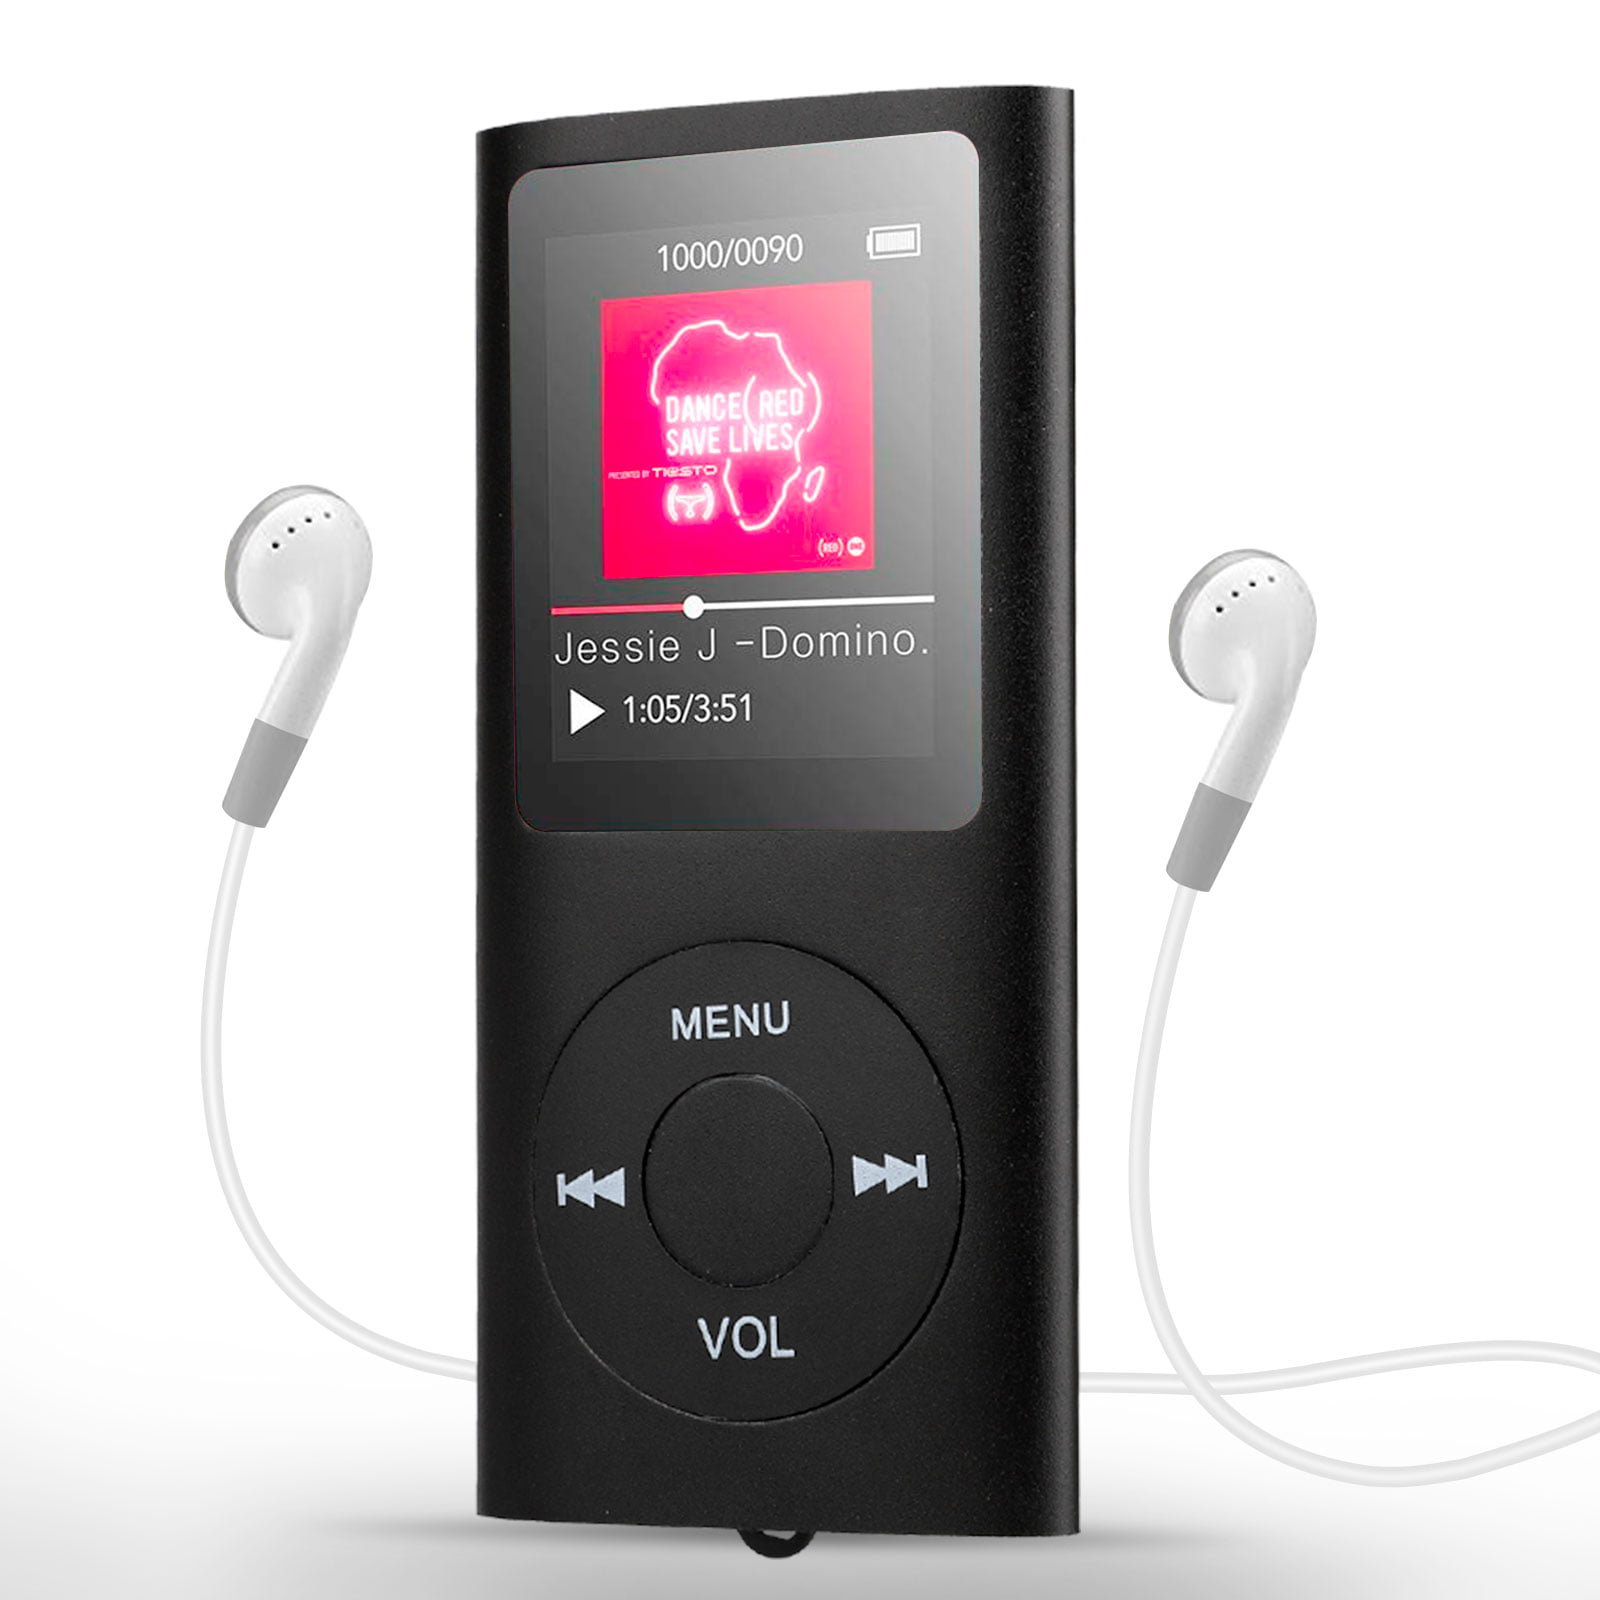 MP3 Player - 64GB Supported MP3 Player, Portable Lossless Sound MP3 ...